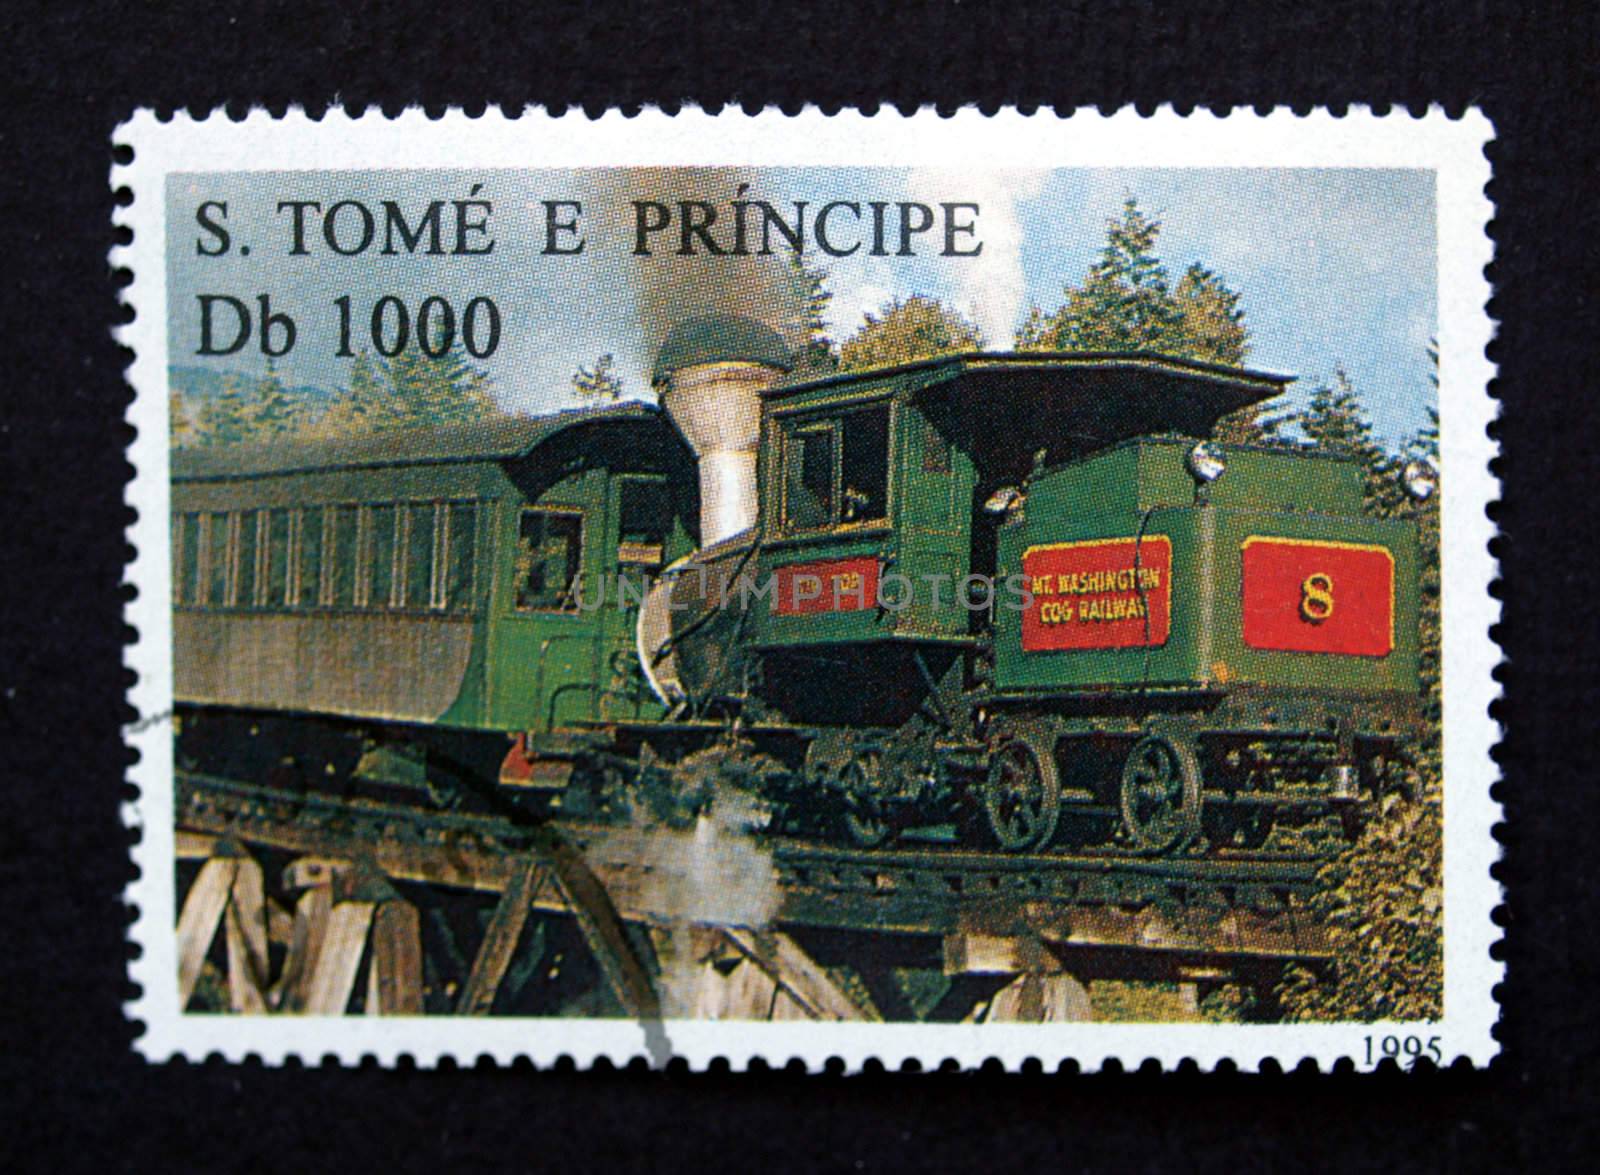 S Tome and Principe stamp with train by paolo77